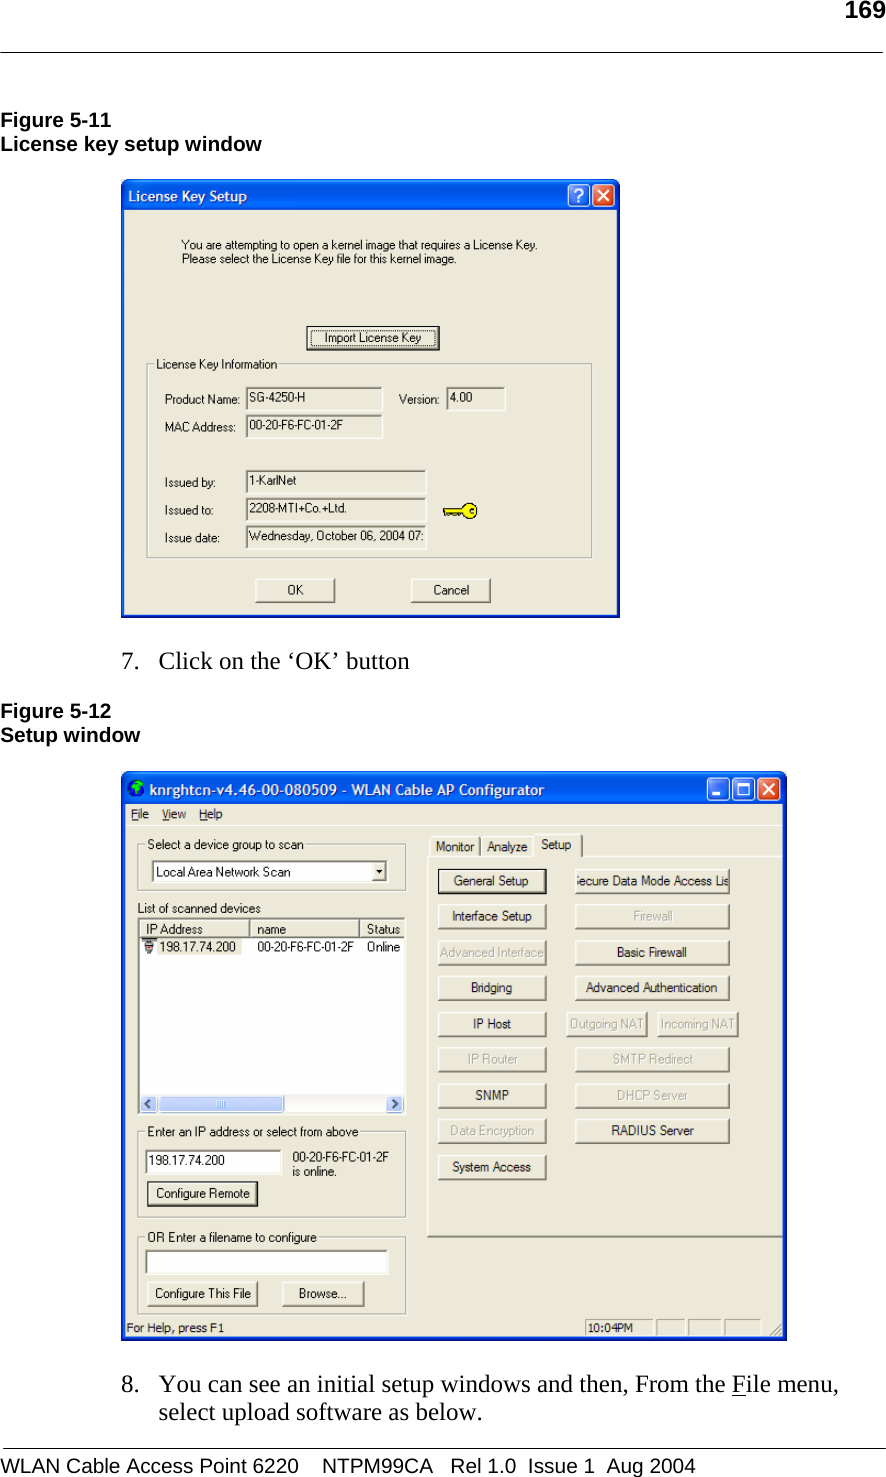   169  Figure 5-11 License key setup window    7. Click on the ‘OK’ button   Figure 5-12 Setup window    8. You can see an initial setup windows and then, From the File menu, select upload software as below. WLAN Cable Access Point 6220    NTPM99CA   Rel 1.0  Issue 1  Aug 2004 